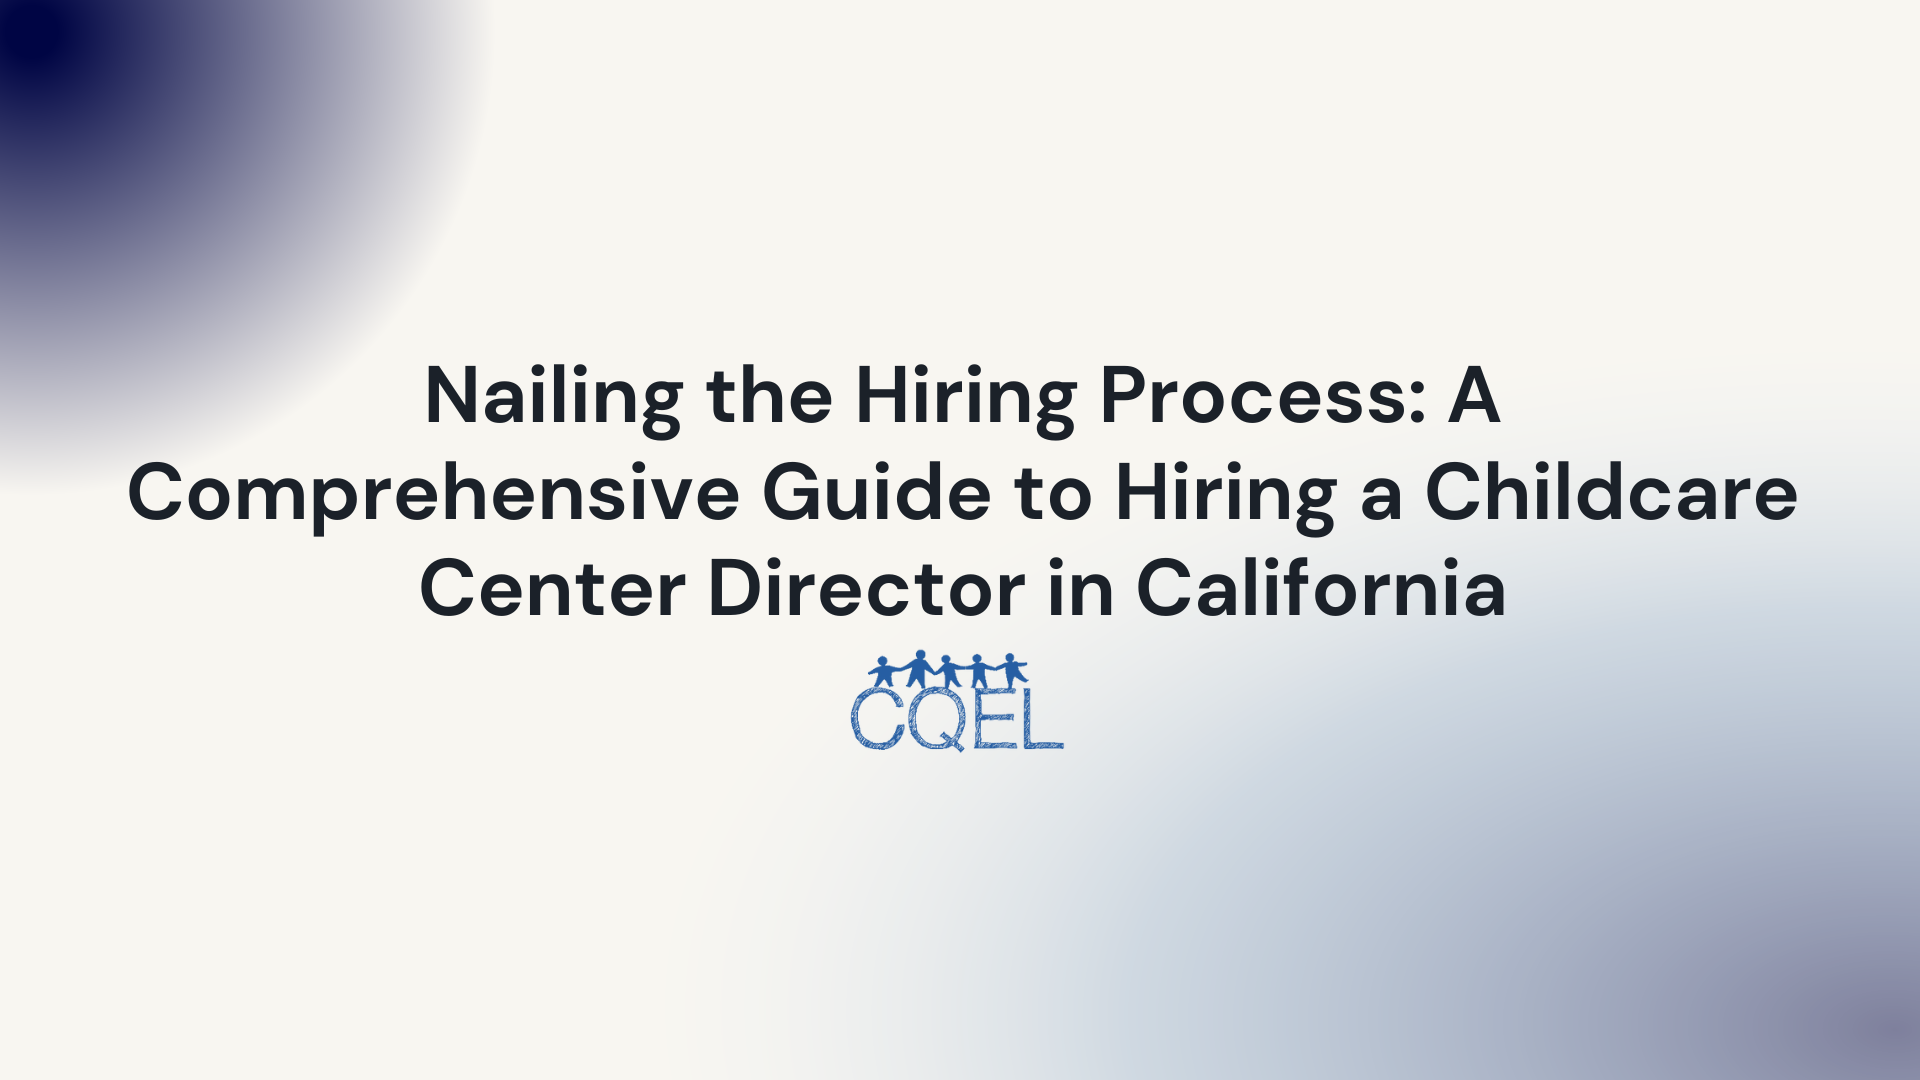 Nailing the Hiring Process: A Comprehensive Guide to Hiring a Childcare Center Director in California